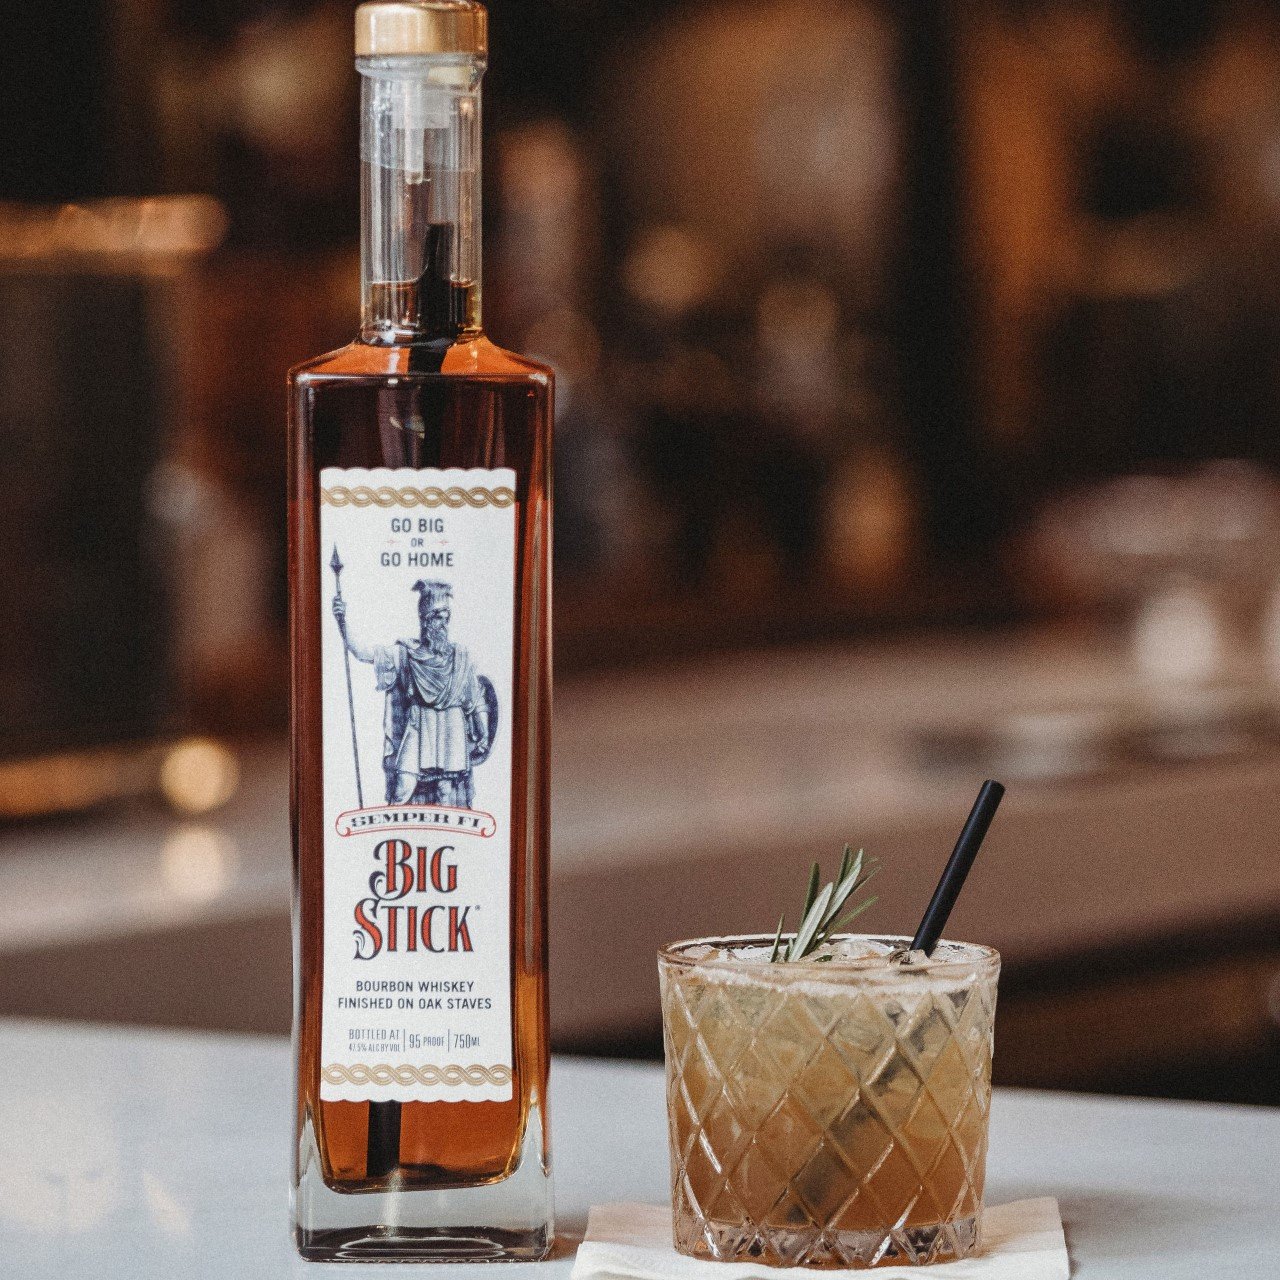 Big Stick Spirits makes and sells bourbon, and donates a portion of its profits to military charities.